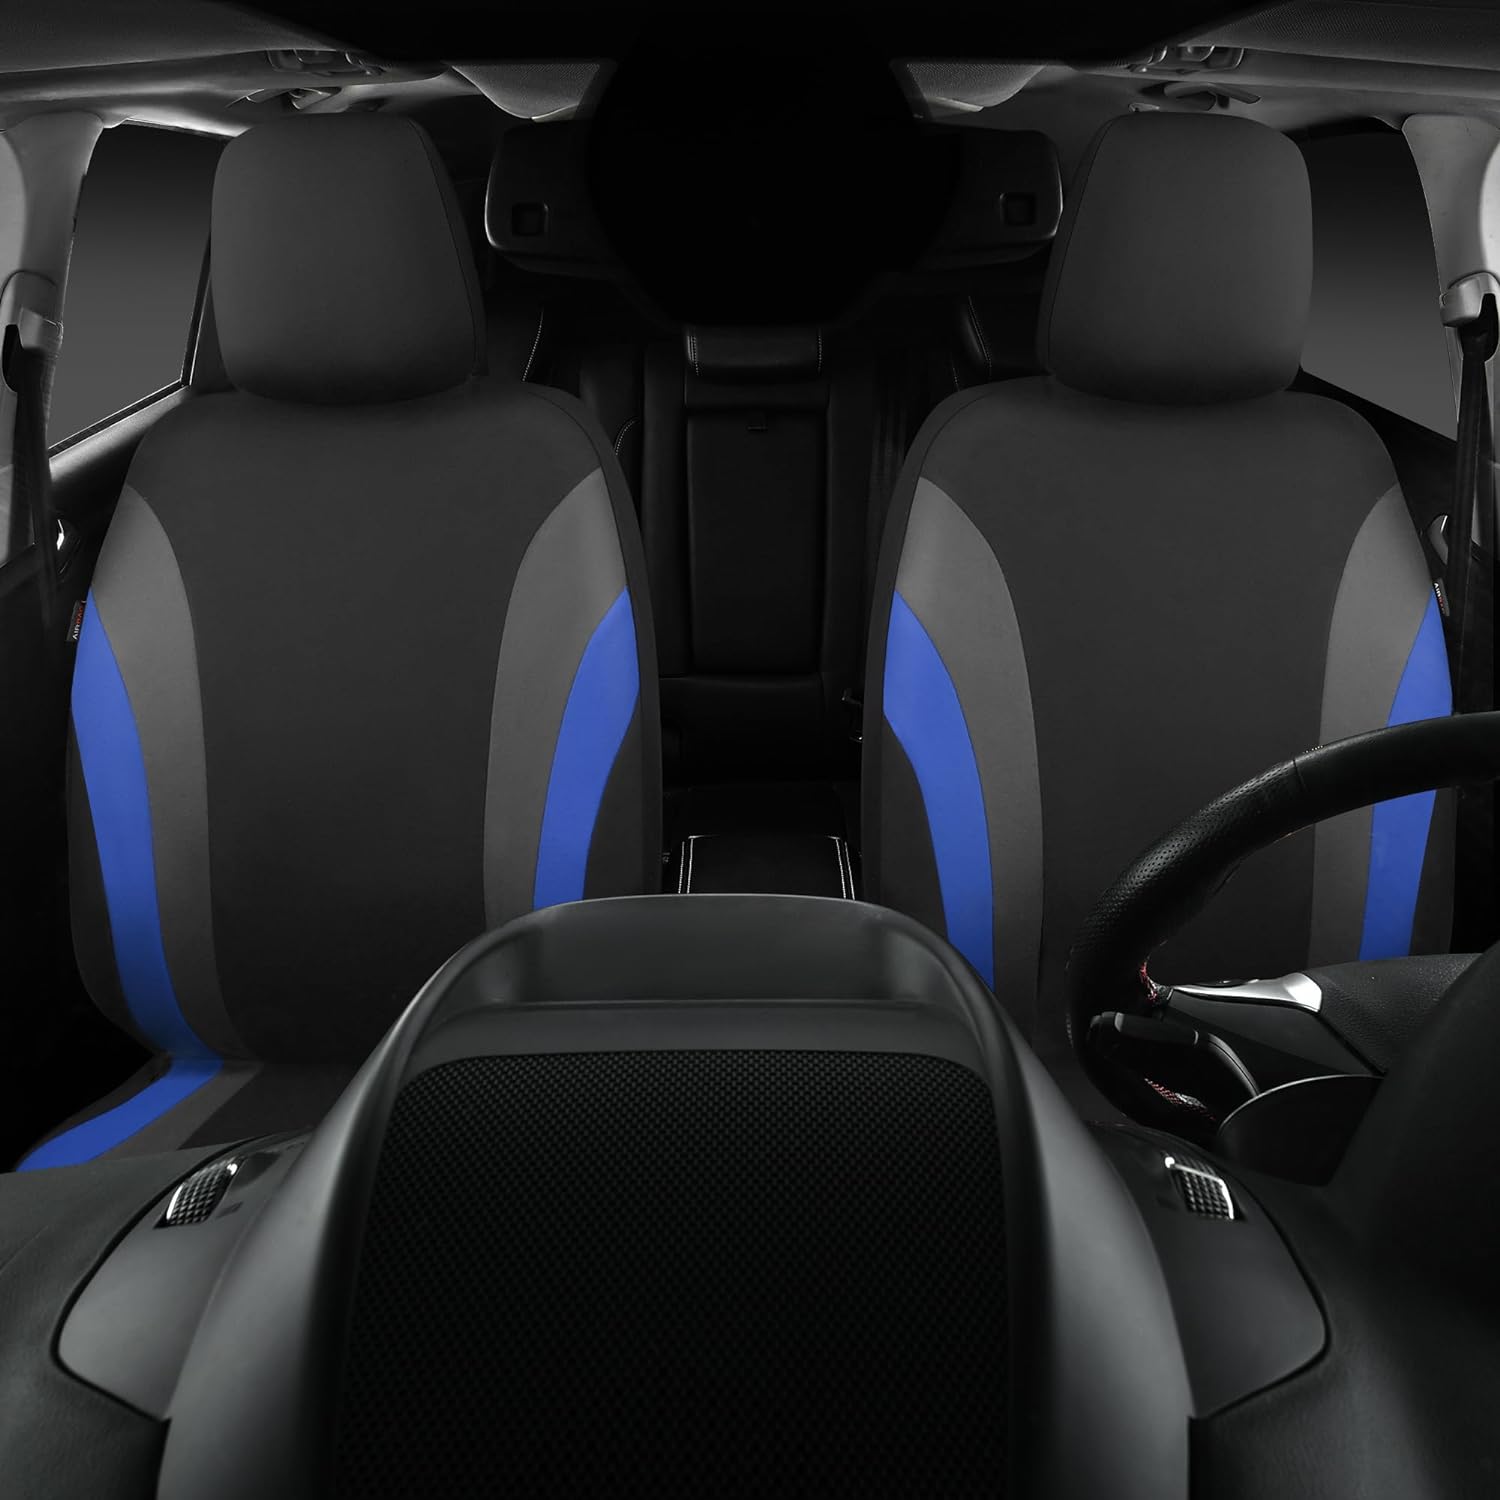 CAR PASS Line Rider Sporty Front Seat Covers, Blue Car Seat Covers Two Front Seats Only, Airbag Compatible,Universal Fit Sedans,Cars,Vans,SUV,Truck(Black and Blue)